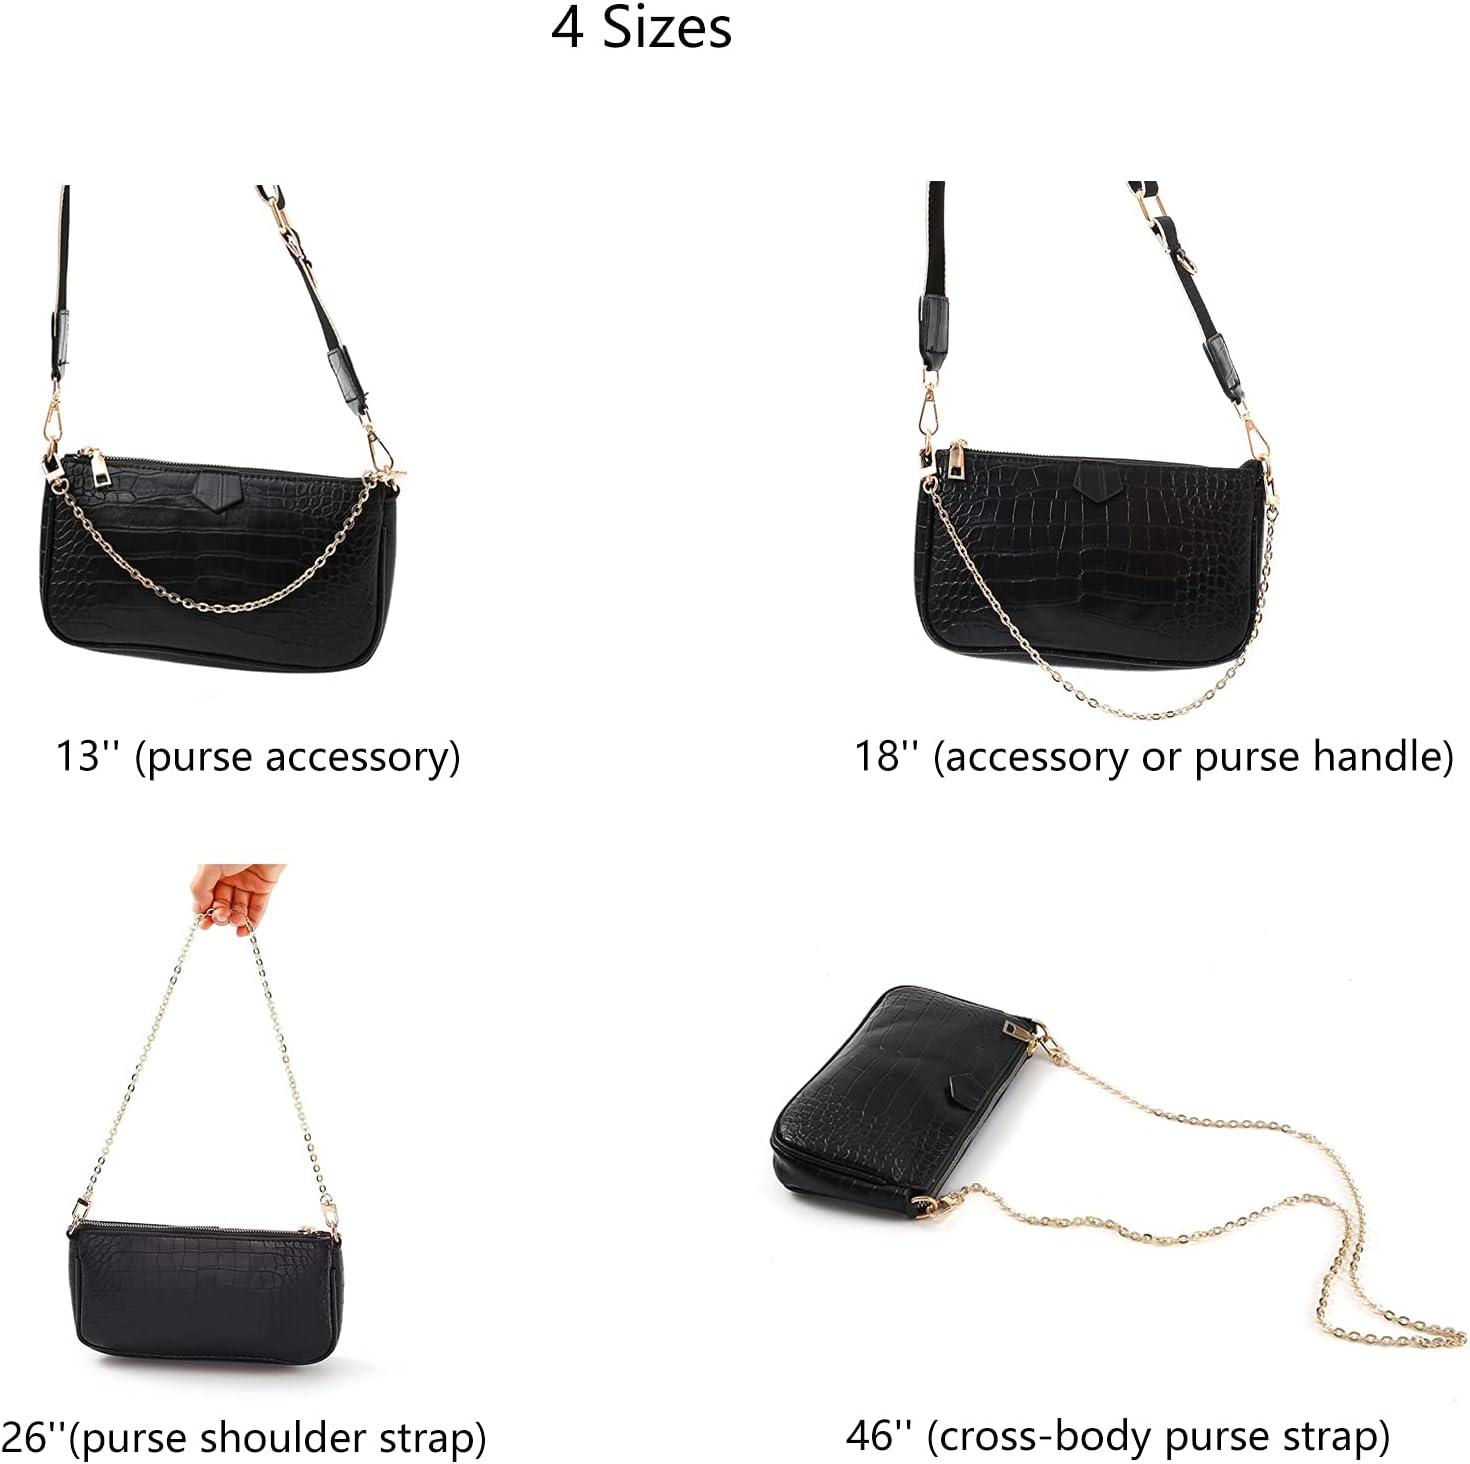 Bags Handle Strap Accessories  Leather Hand Bag Accessories